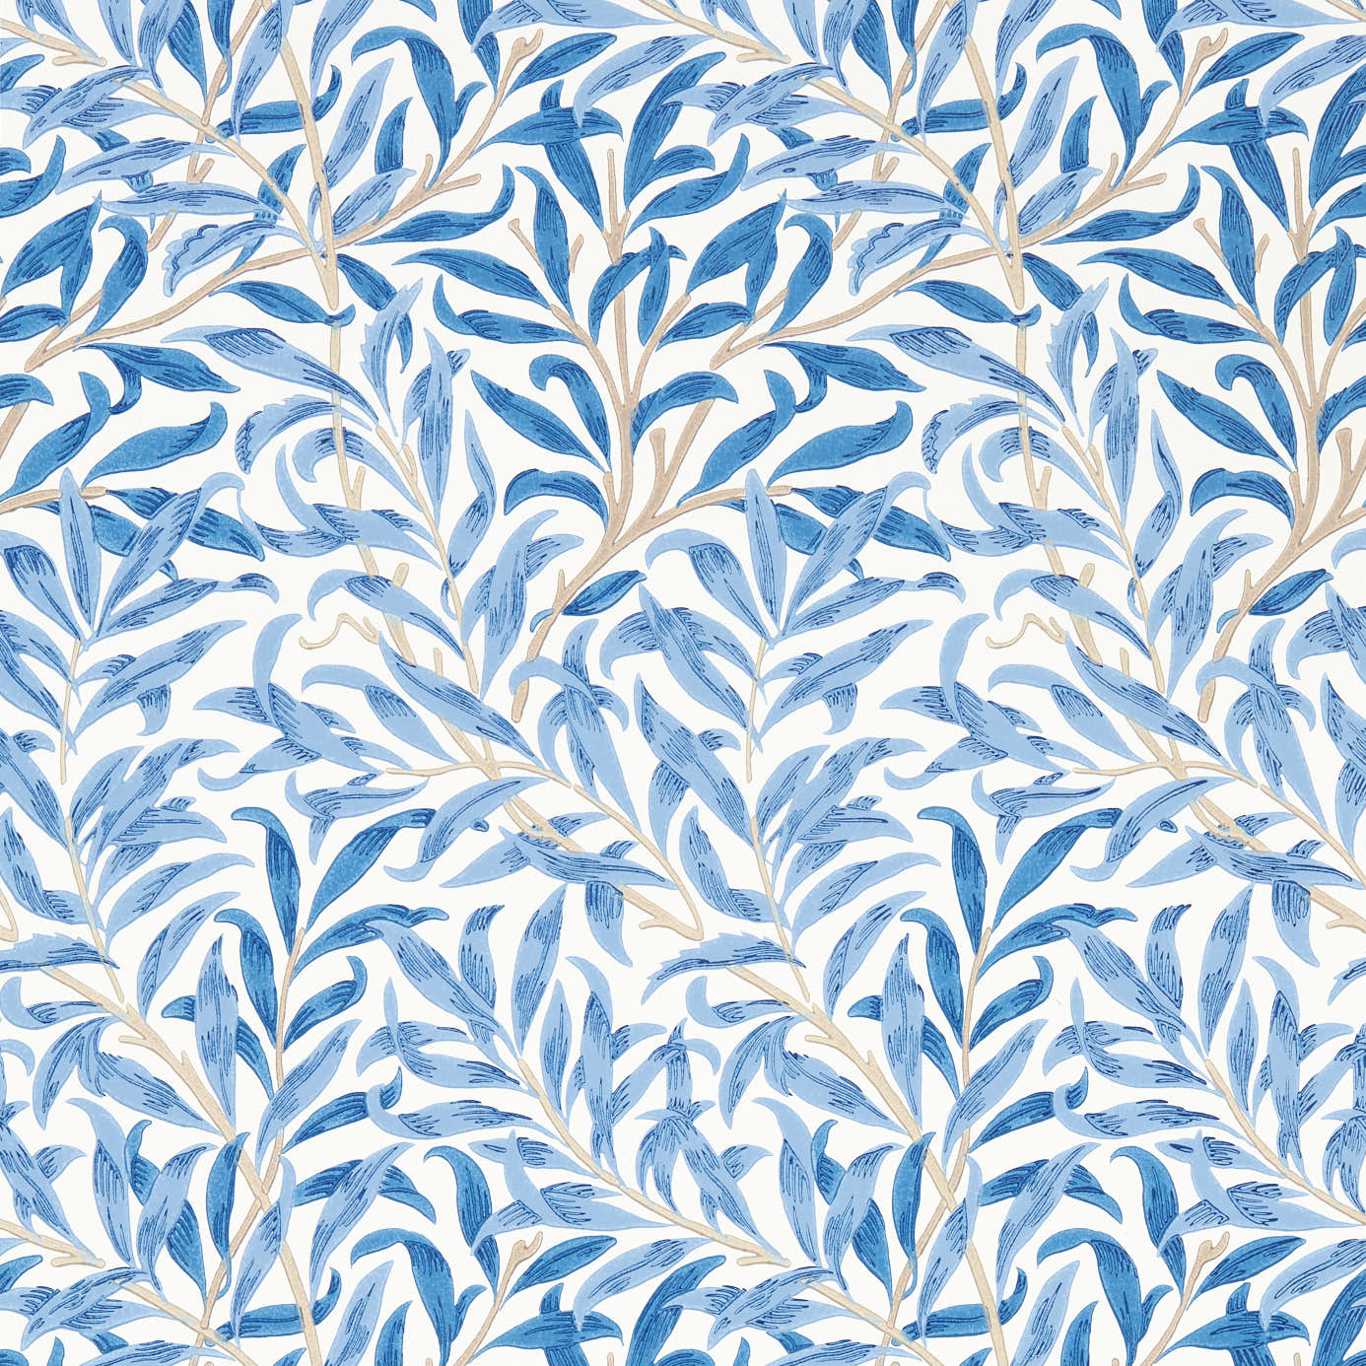 Willow Bough Woad Wallpaper MSIM217080 by Morris & Co